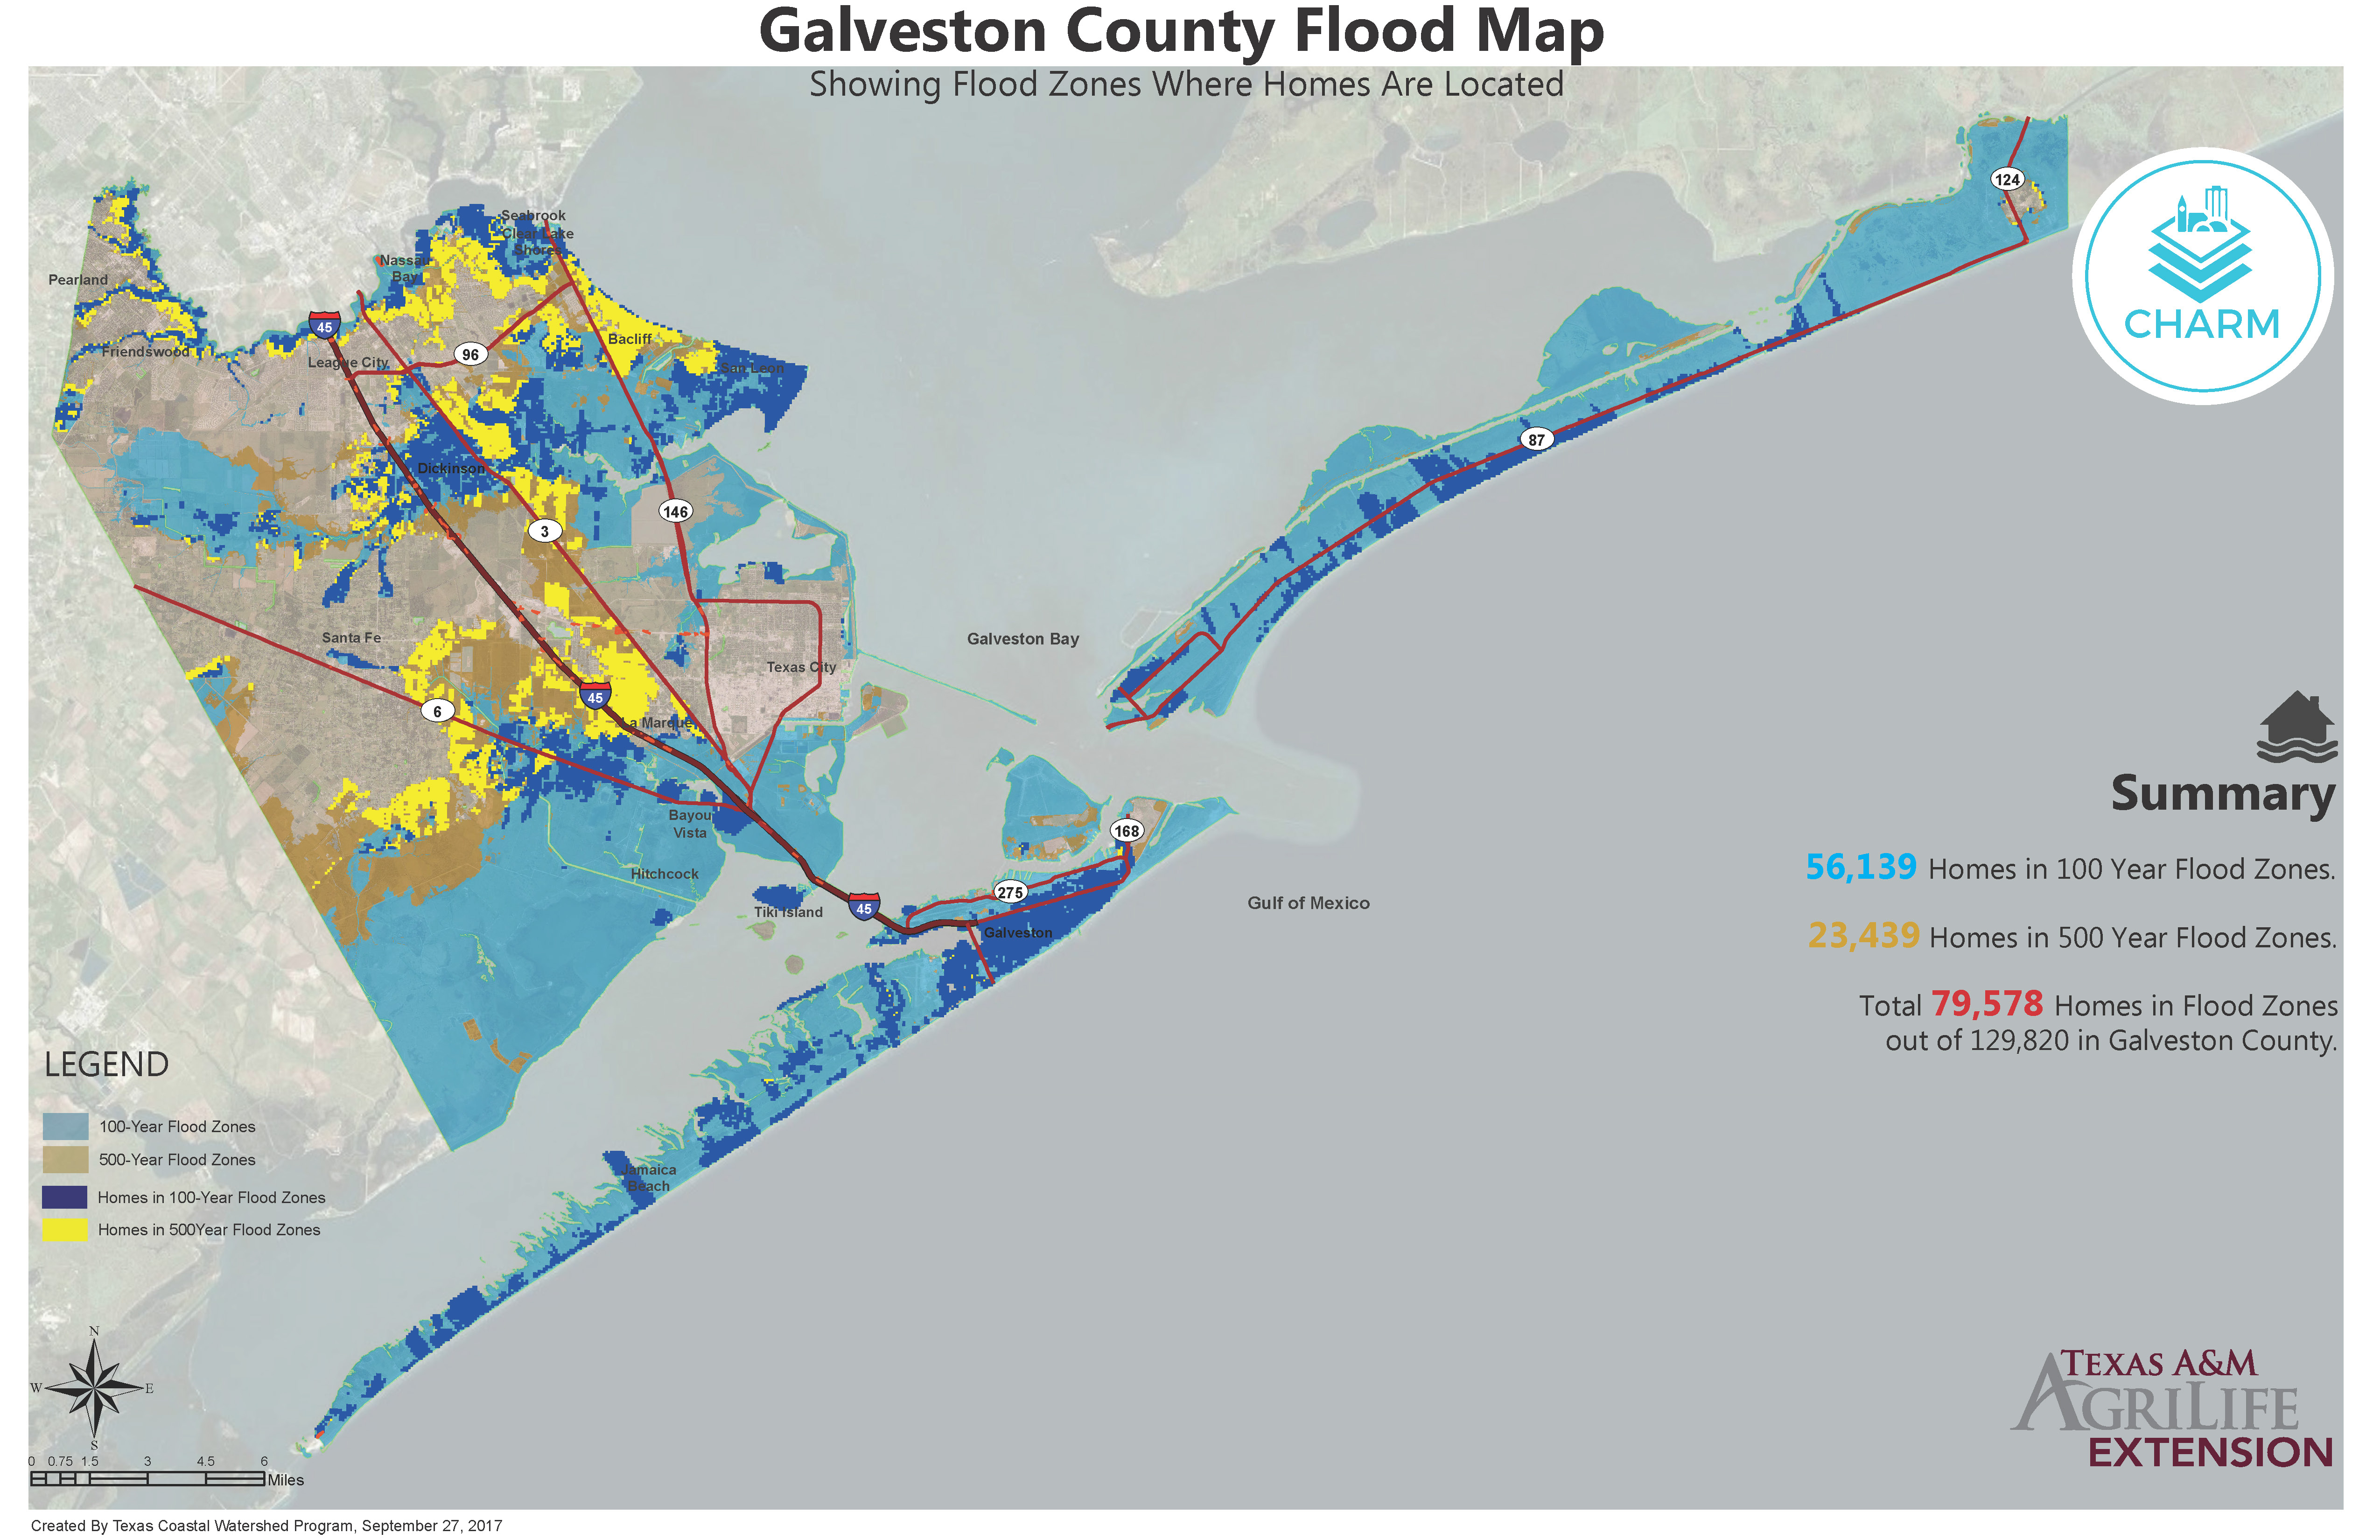 Flood Zone Maps For Coastal Counties | Texas Community Watershed - Texas Flood Zone Map